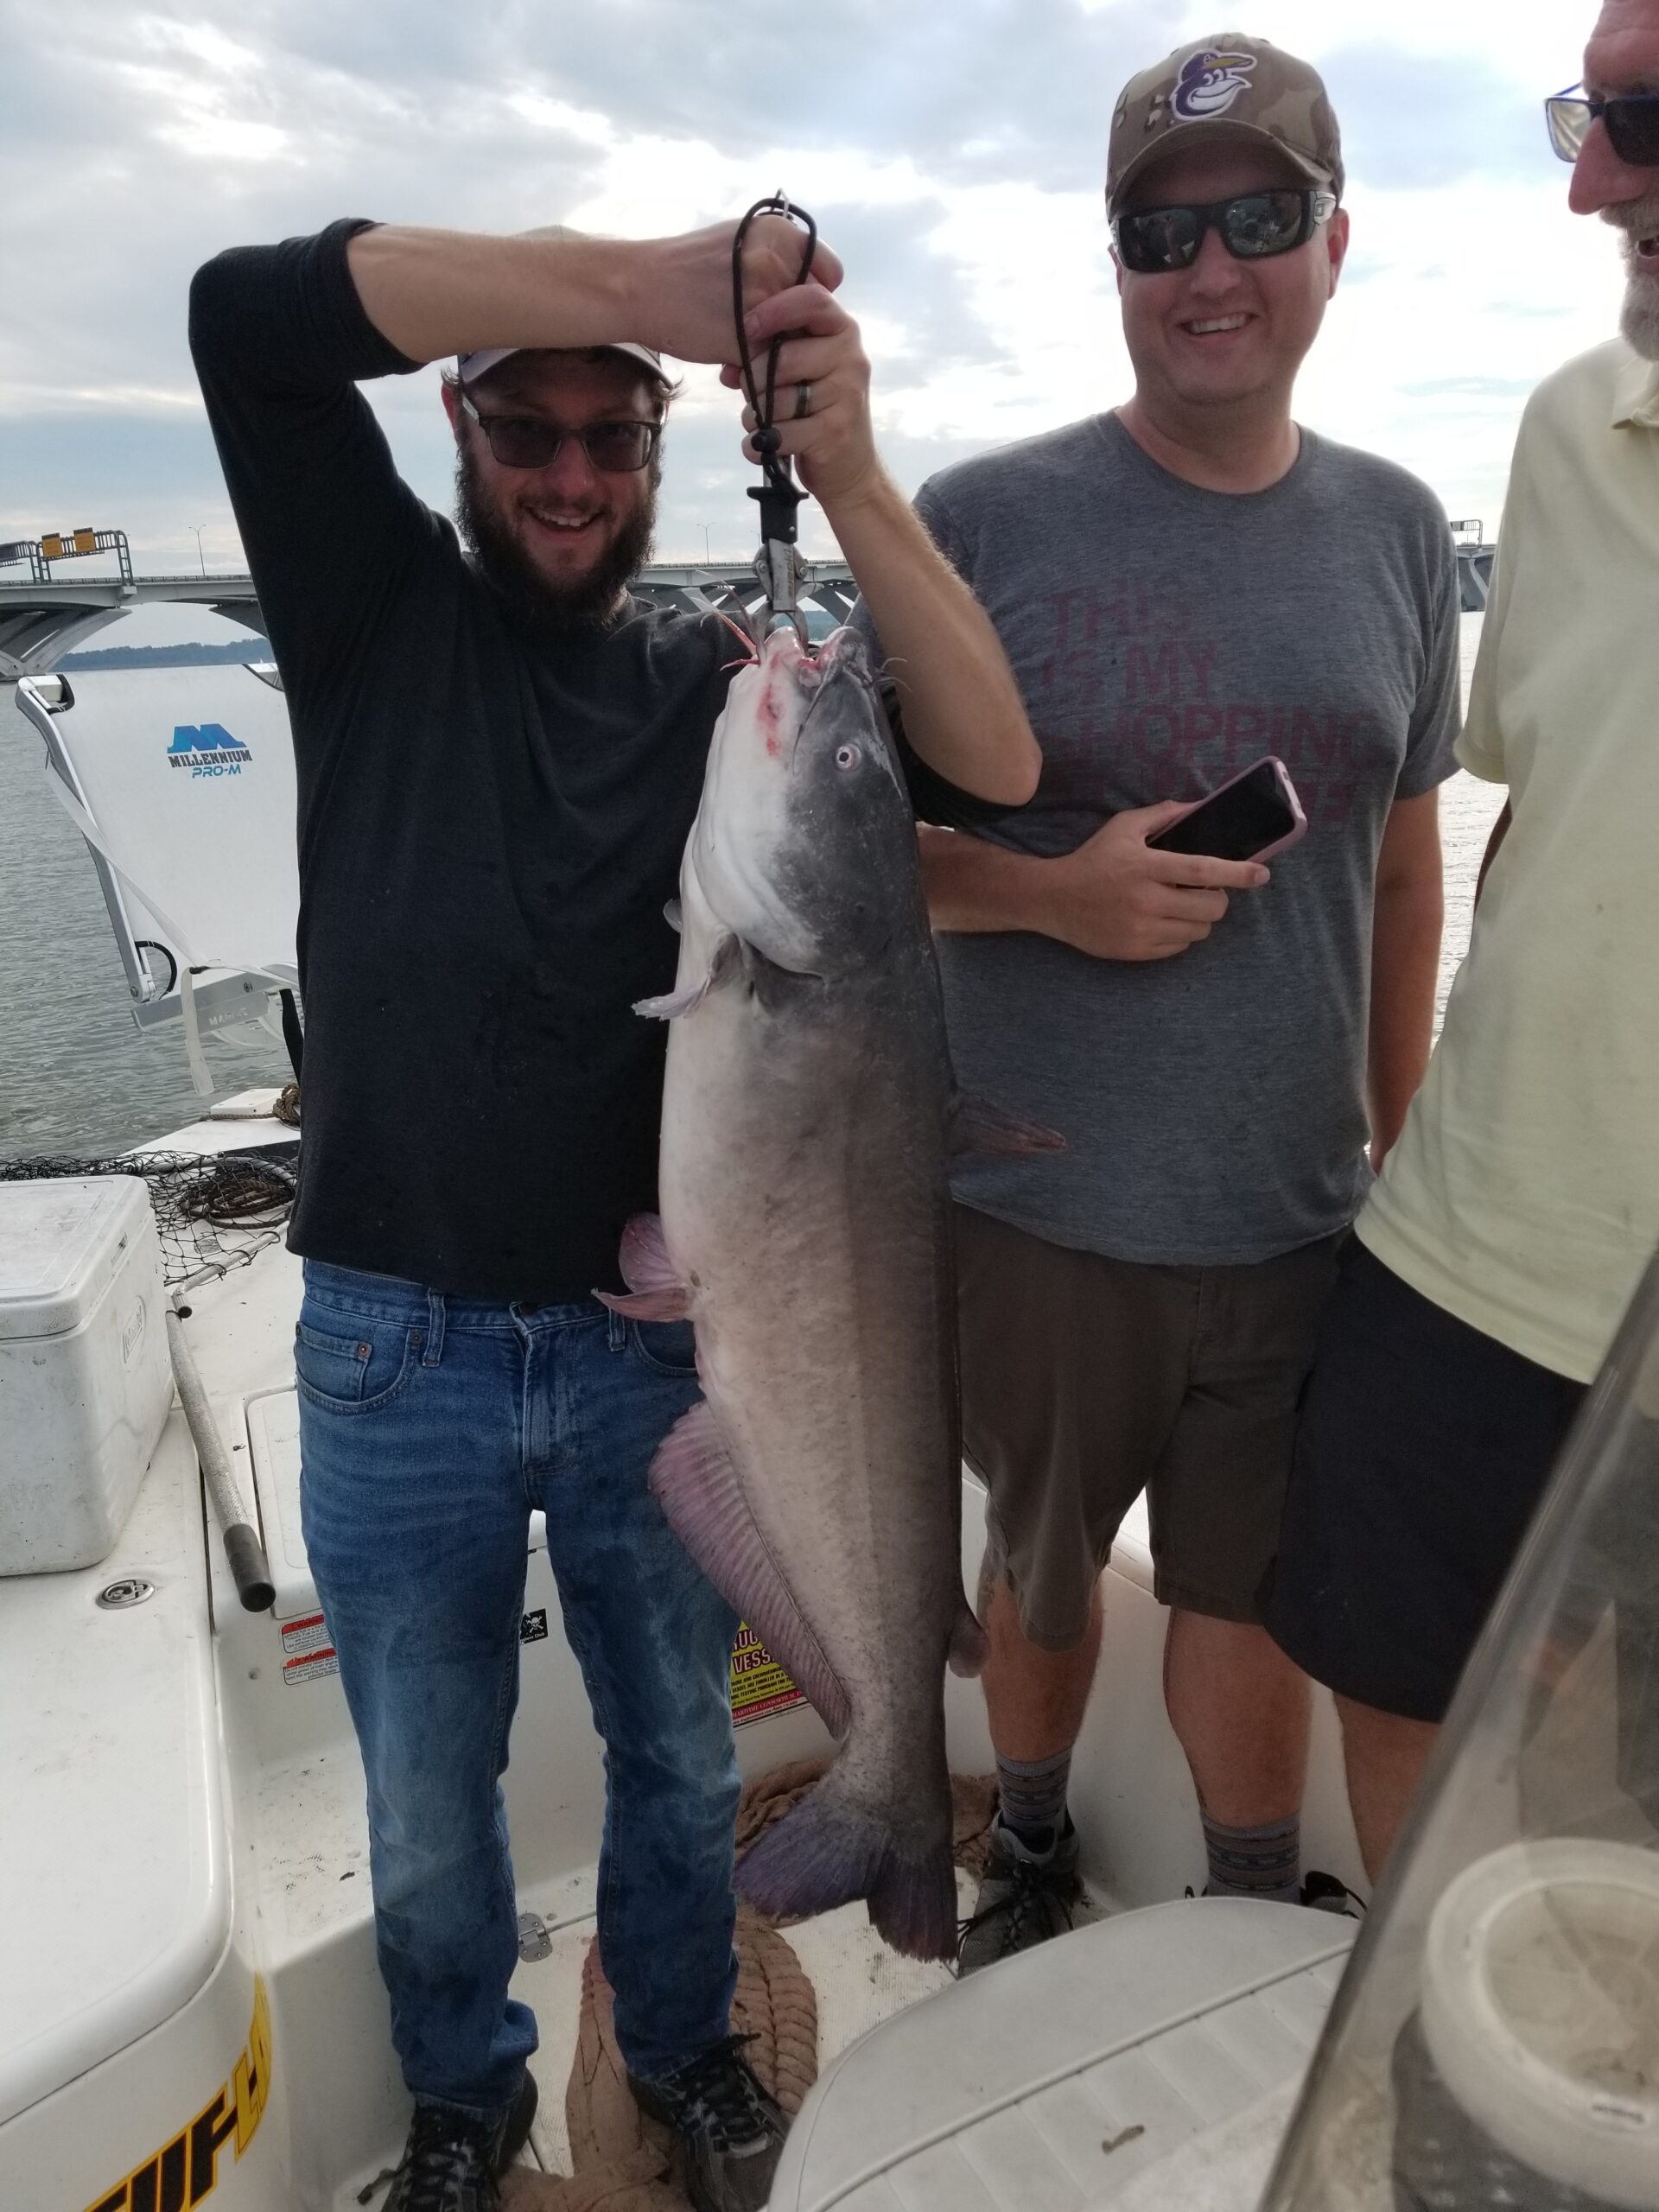 https://indianheadcharters.com/wp-content/uploads/2021/11/10-15-21-2-scaled.jpg